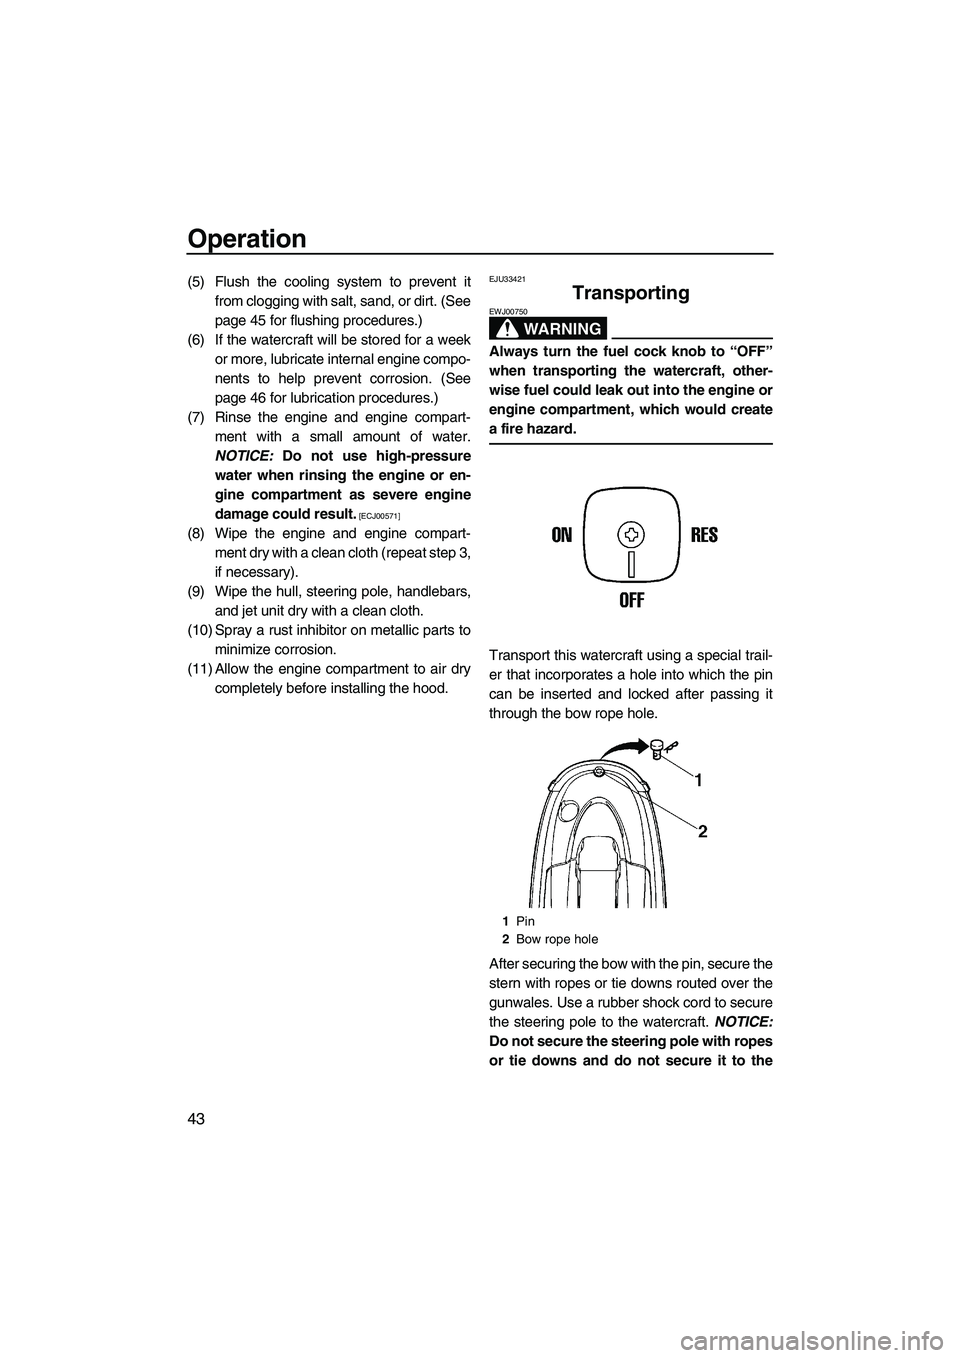 YAMAHA SUPERJET 2009  Owners Manual Operation
43
(5) Flush the cooling system to prevent it
from clogging with salt, sand, or dirt. (See
page 45 for flushing procedures.)
(6) If the watercraft will be stored for a week
or more, lubricat